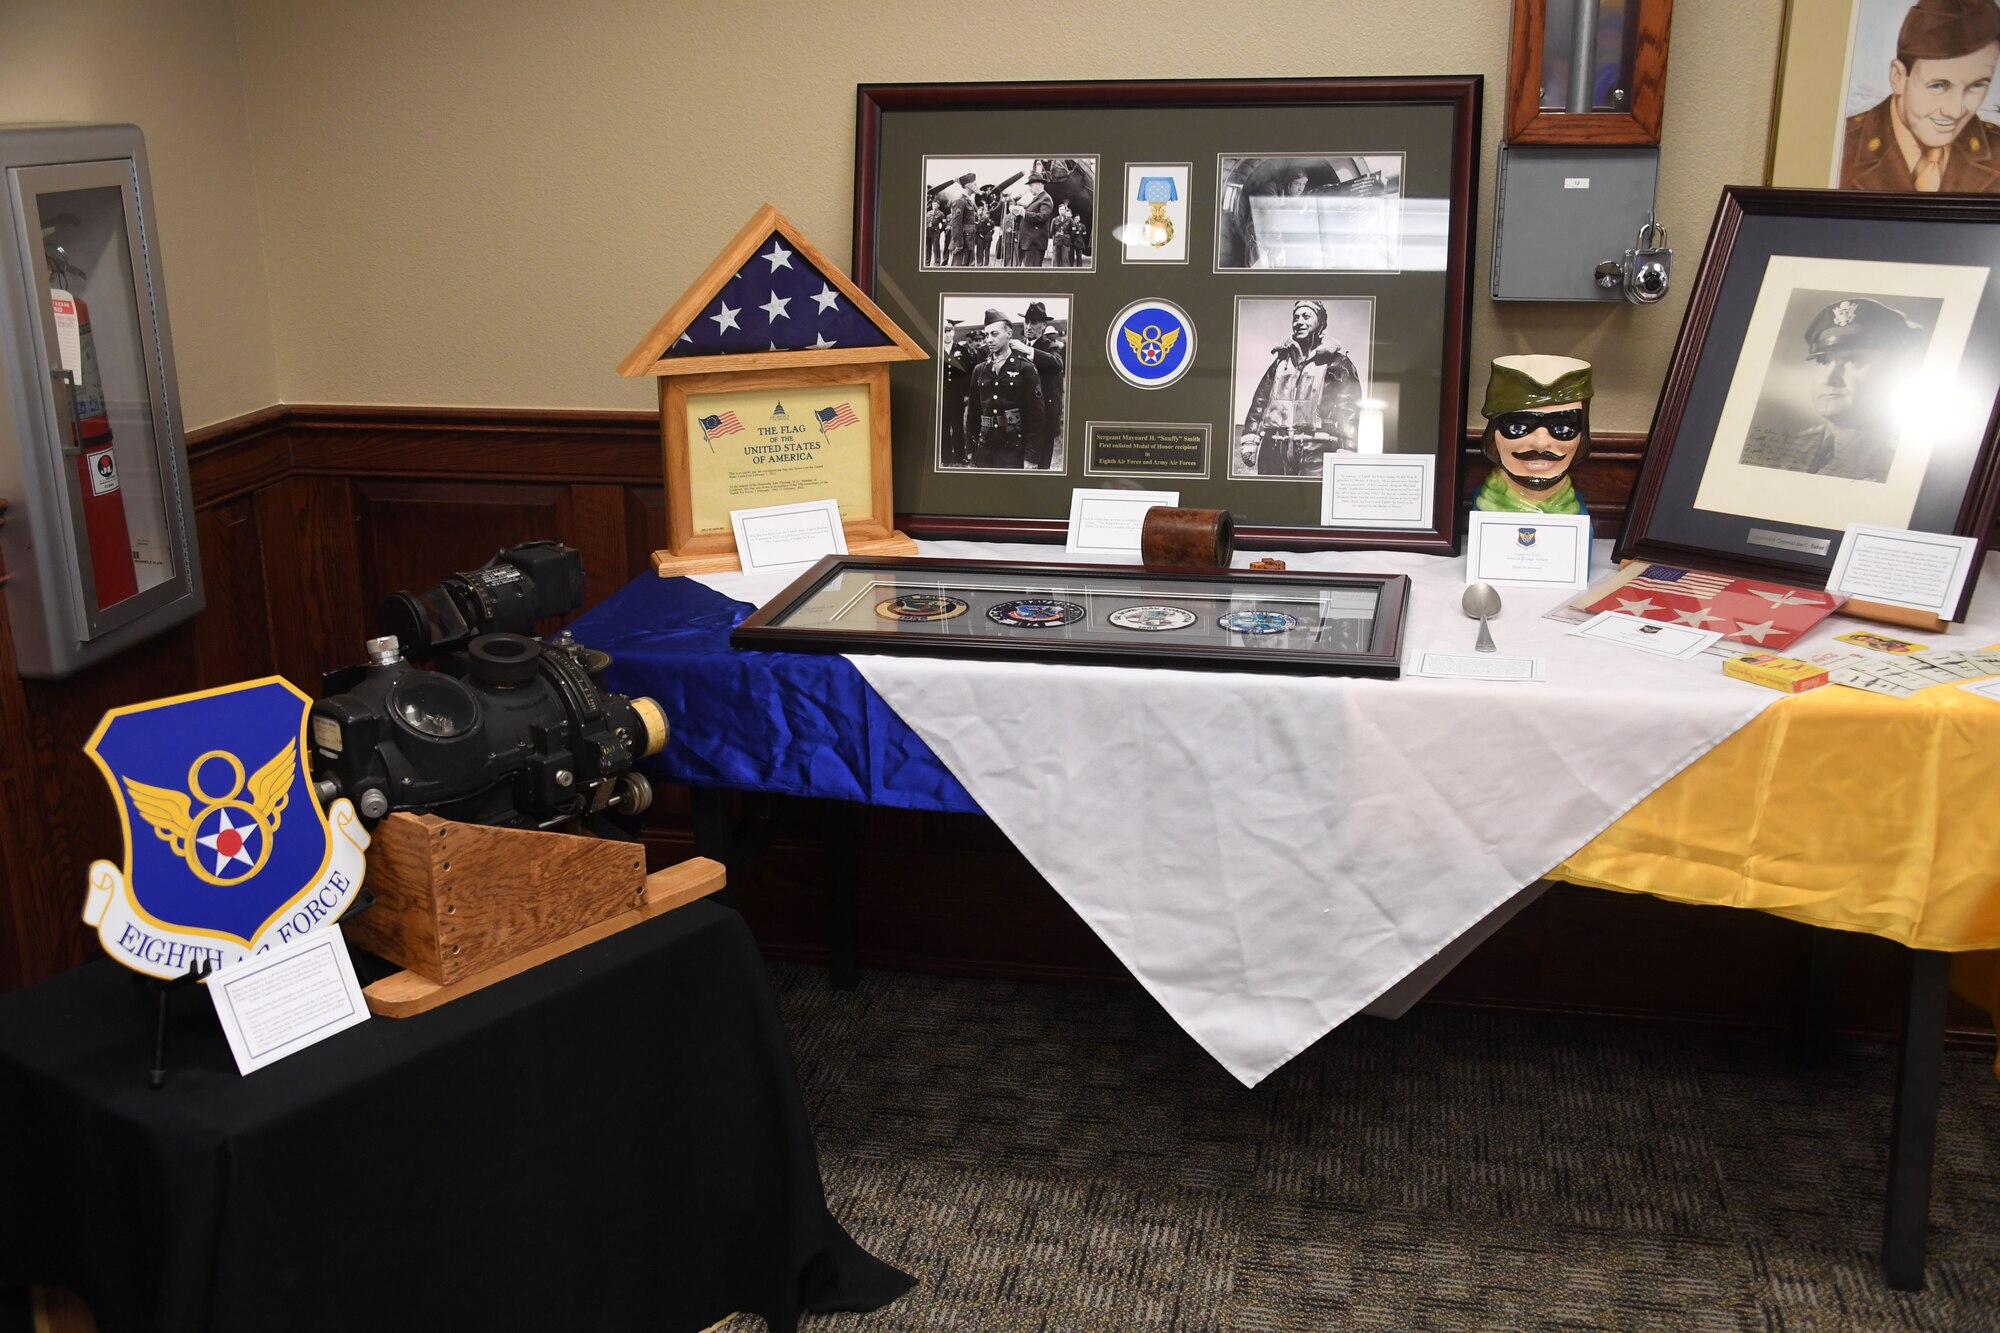 Eighth Air Force artifacts are displayed during the first 8th Air Force, J-GSOC Spouses' Orientation, Nov. 18, 2019. The Toby Mug, historic patches and memorabilia are preserved by the 8th Air Force historian. More than 30 military spouses received an immersion briefing, toured the different J-GSOC work centers and visited with local leadership during the event.